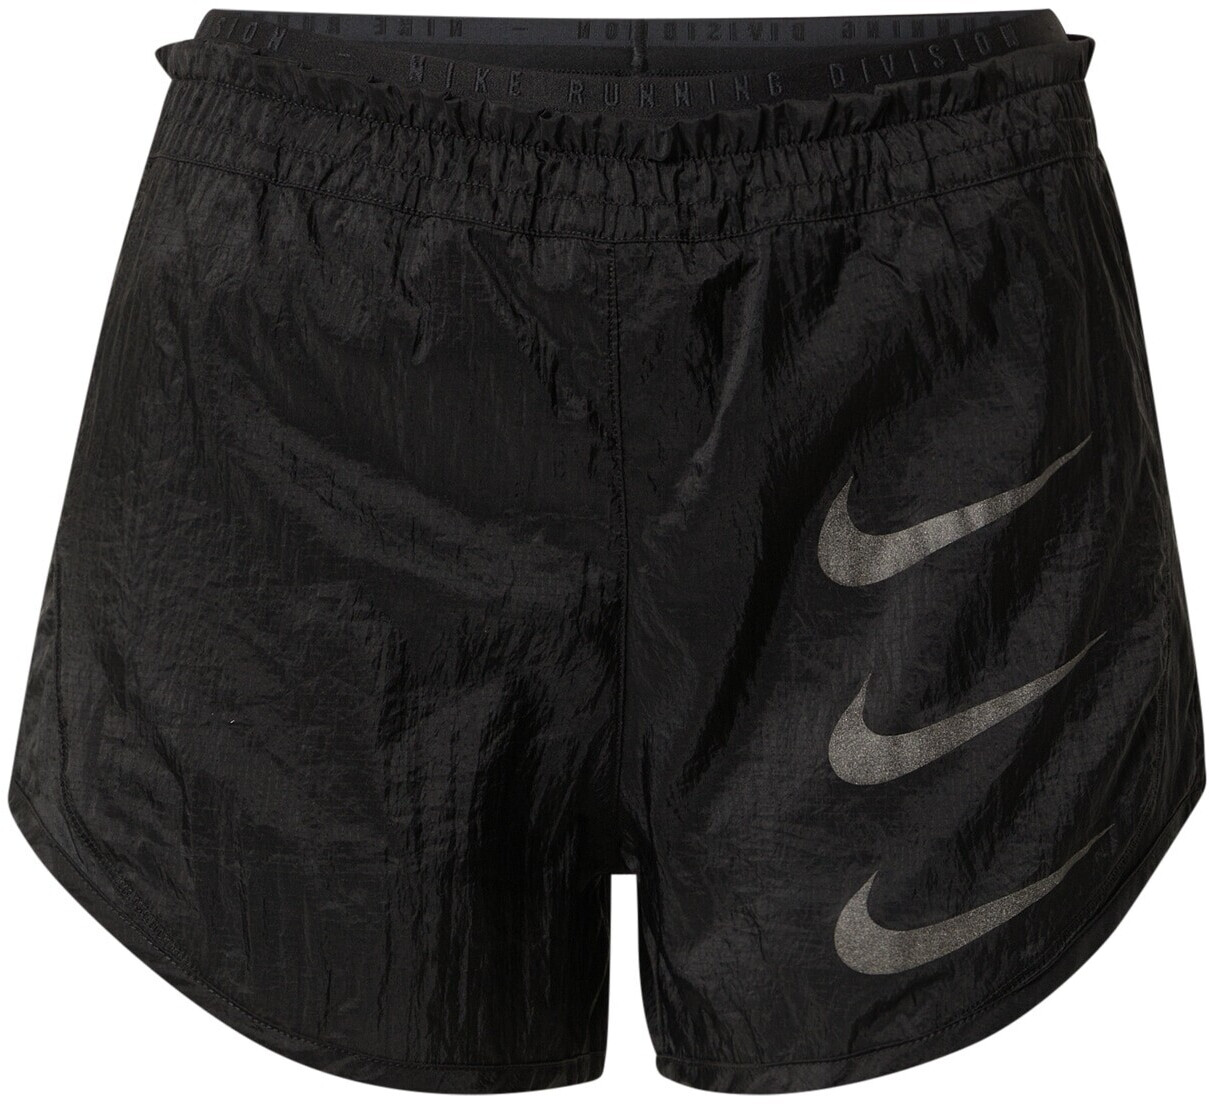 Nike Running Tempo Luxe 3inch shorts in grey